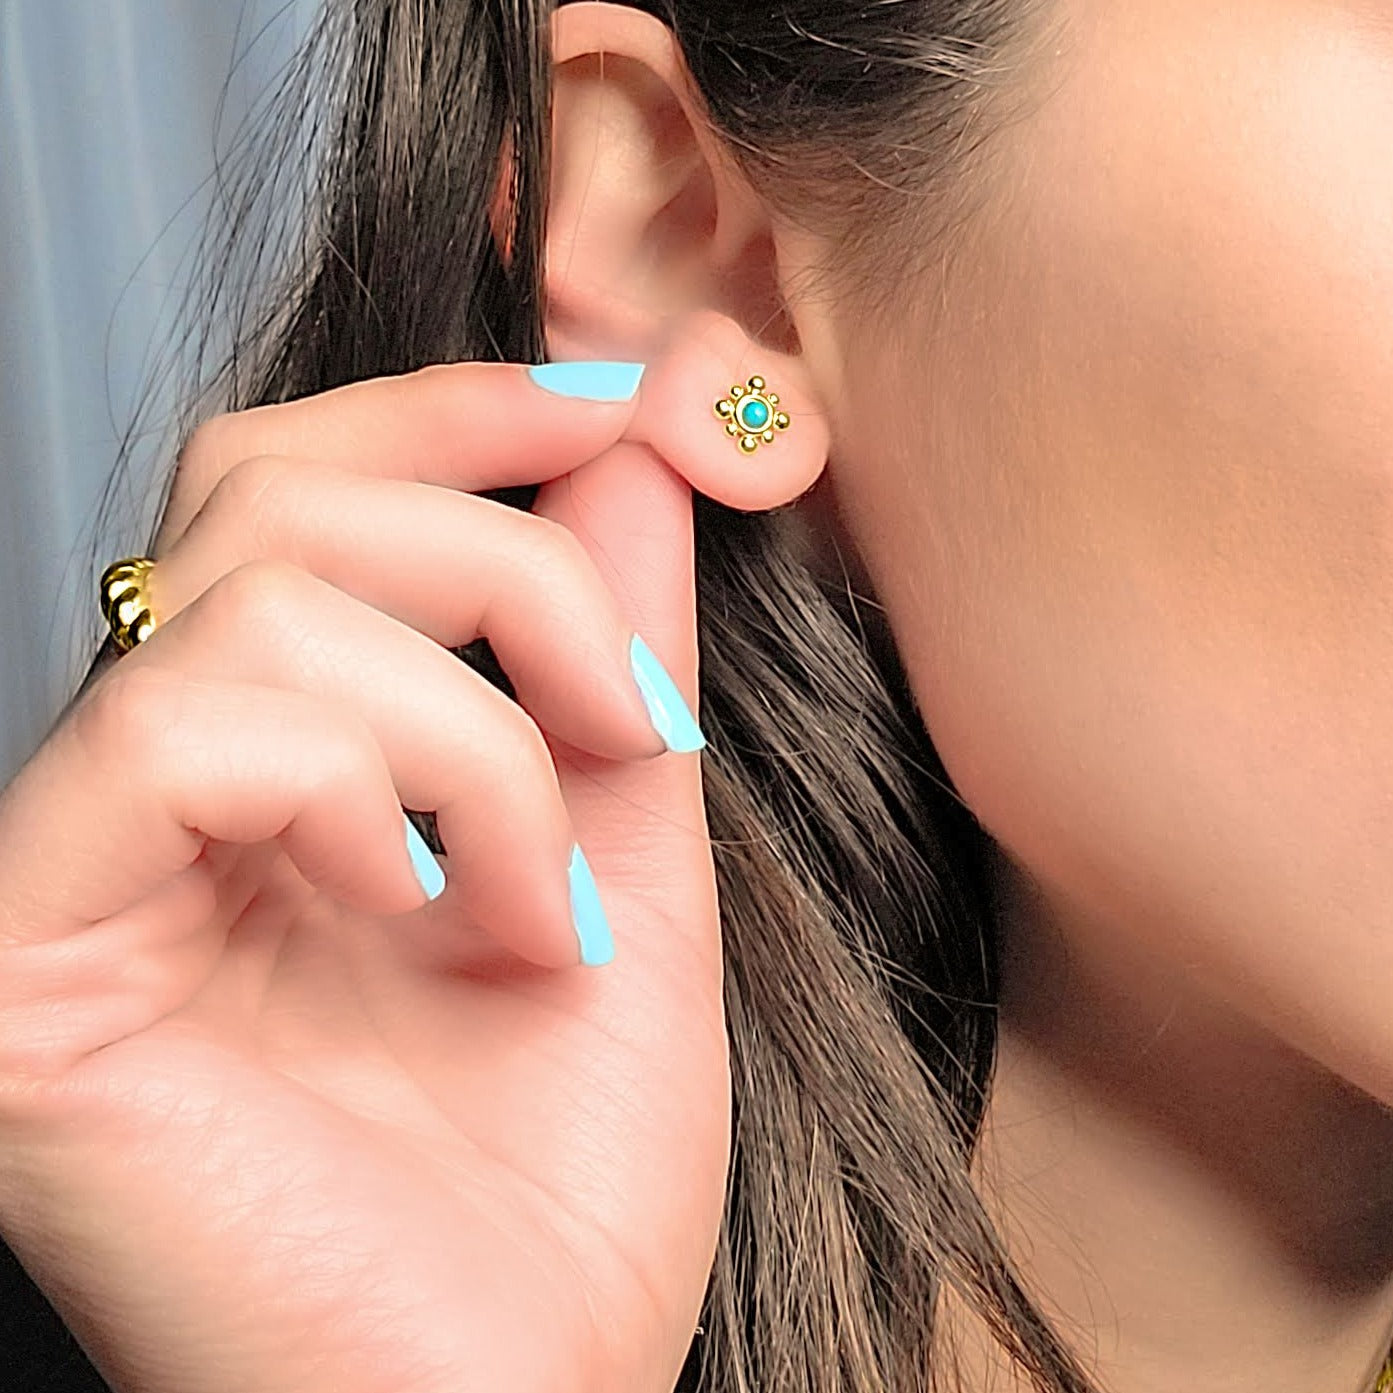 Woman wearing Turquoise studs